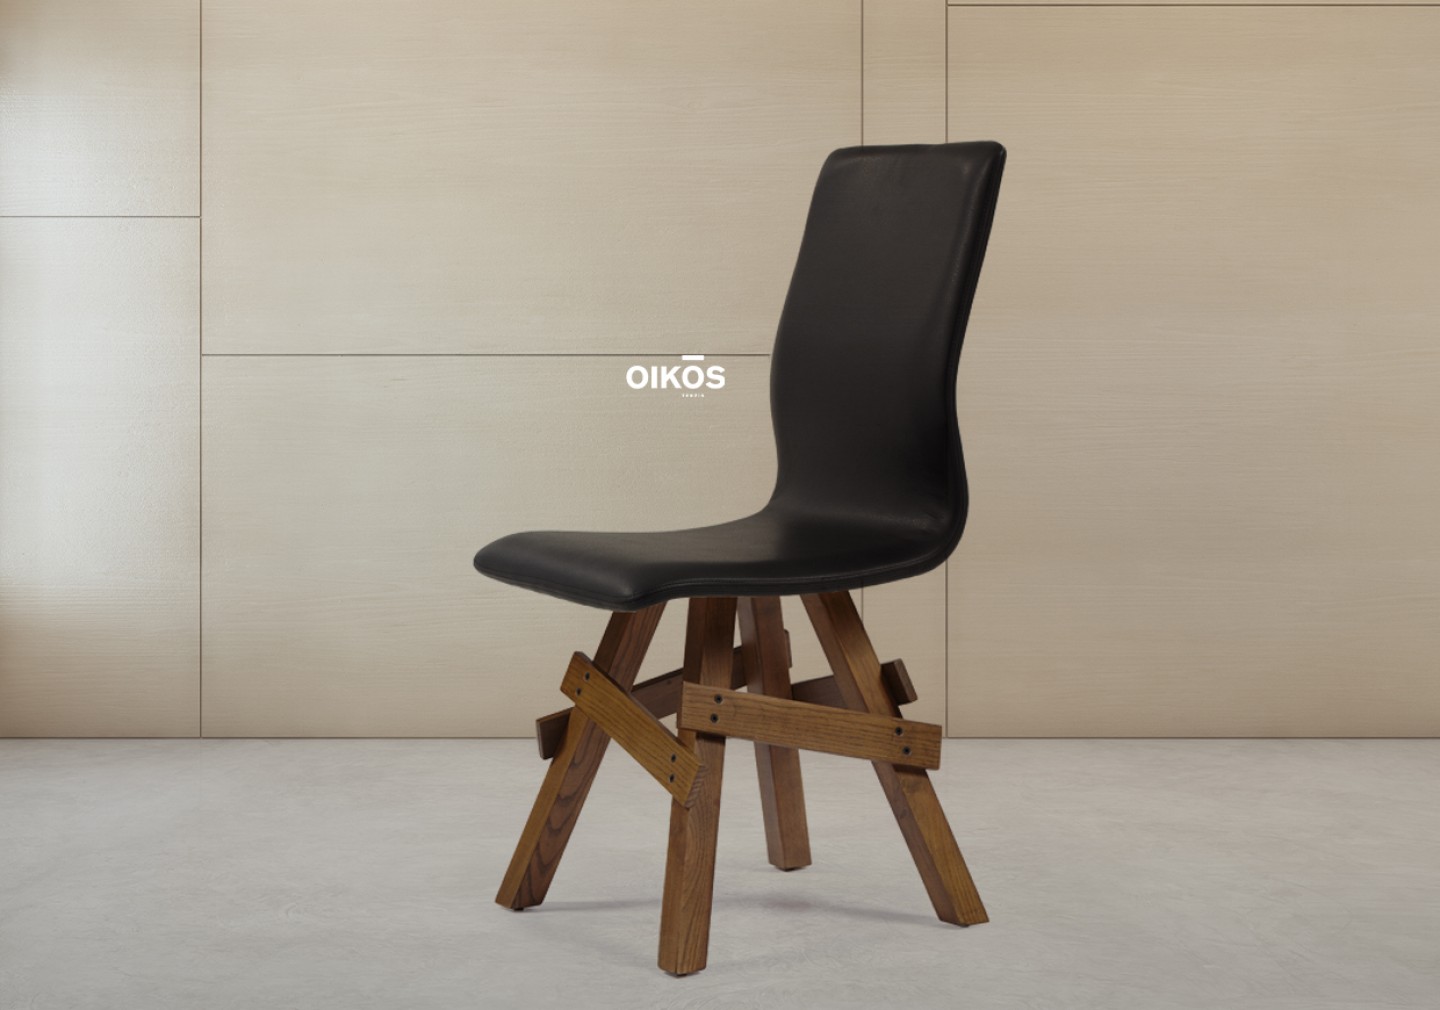 THE WOODY DINING CHAIR